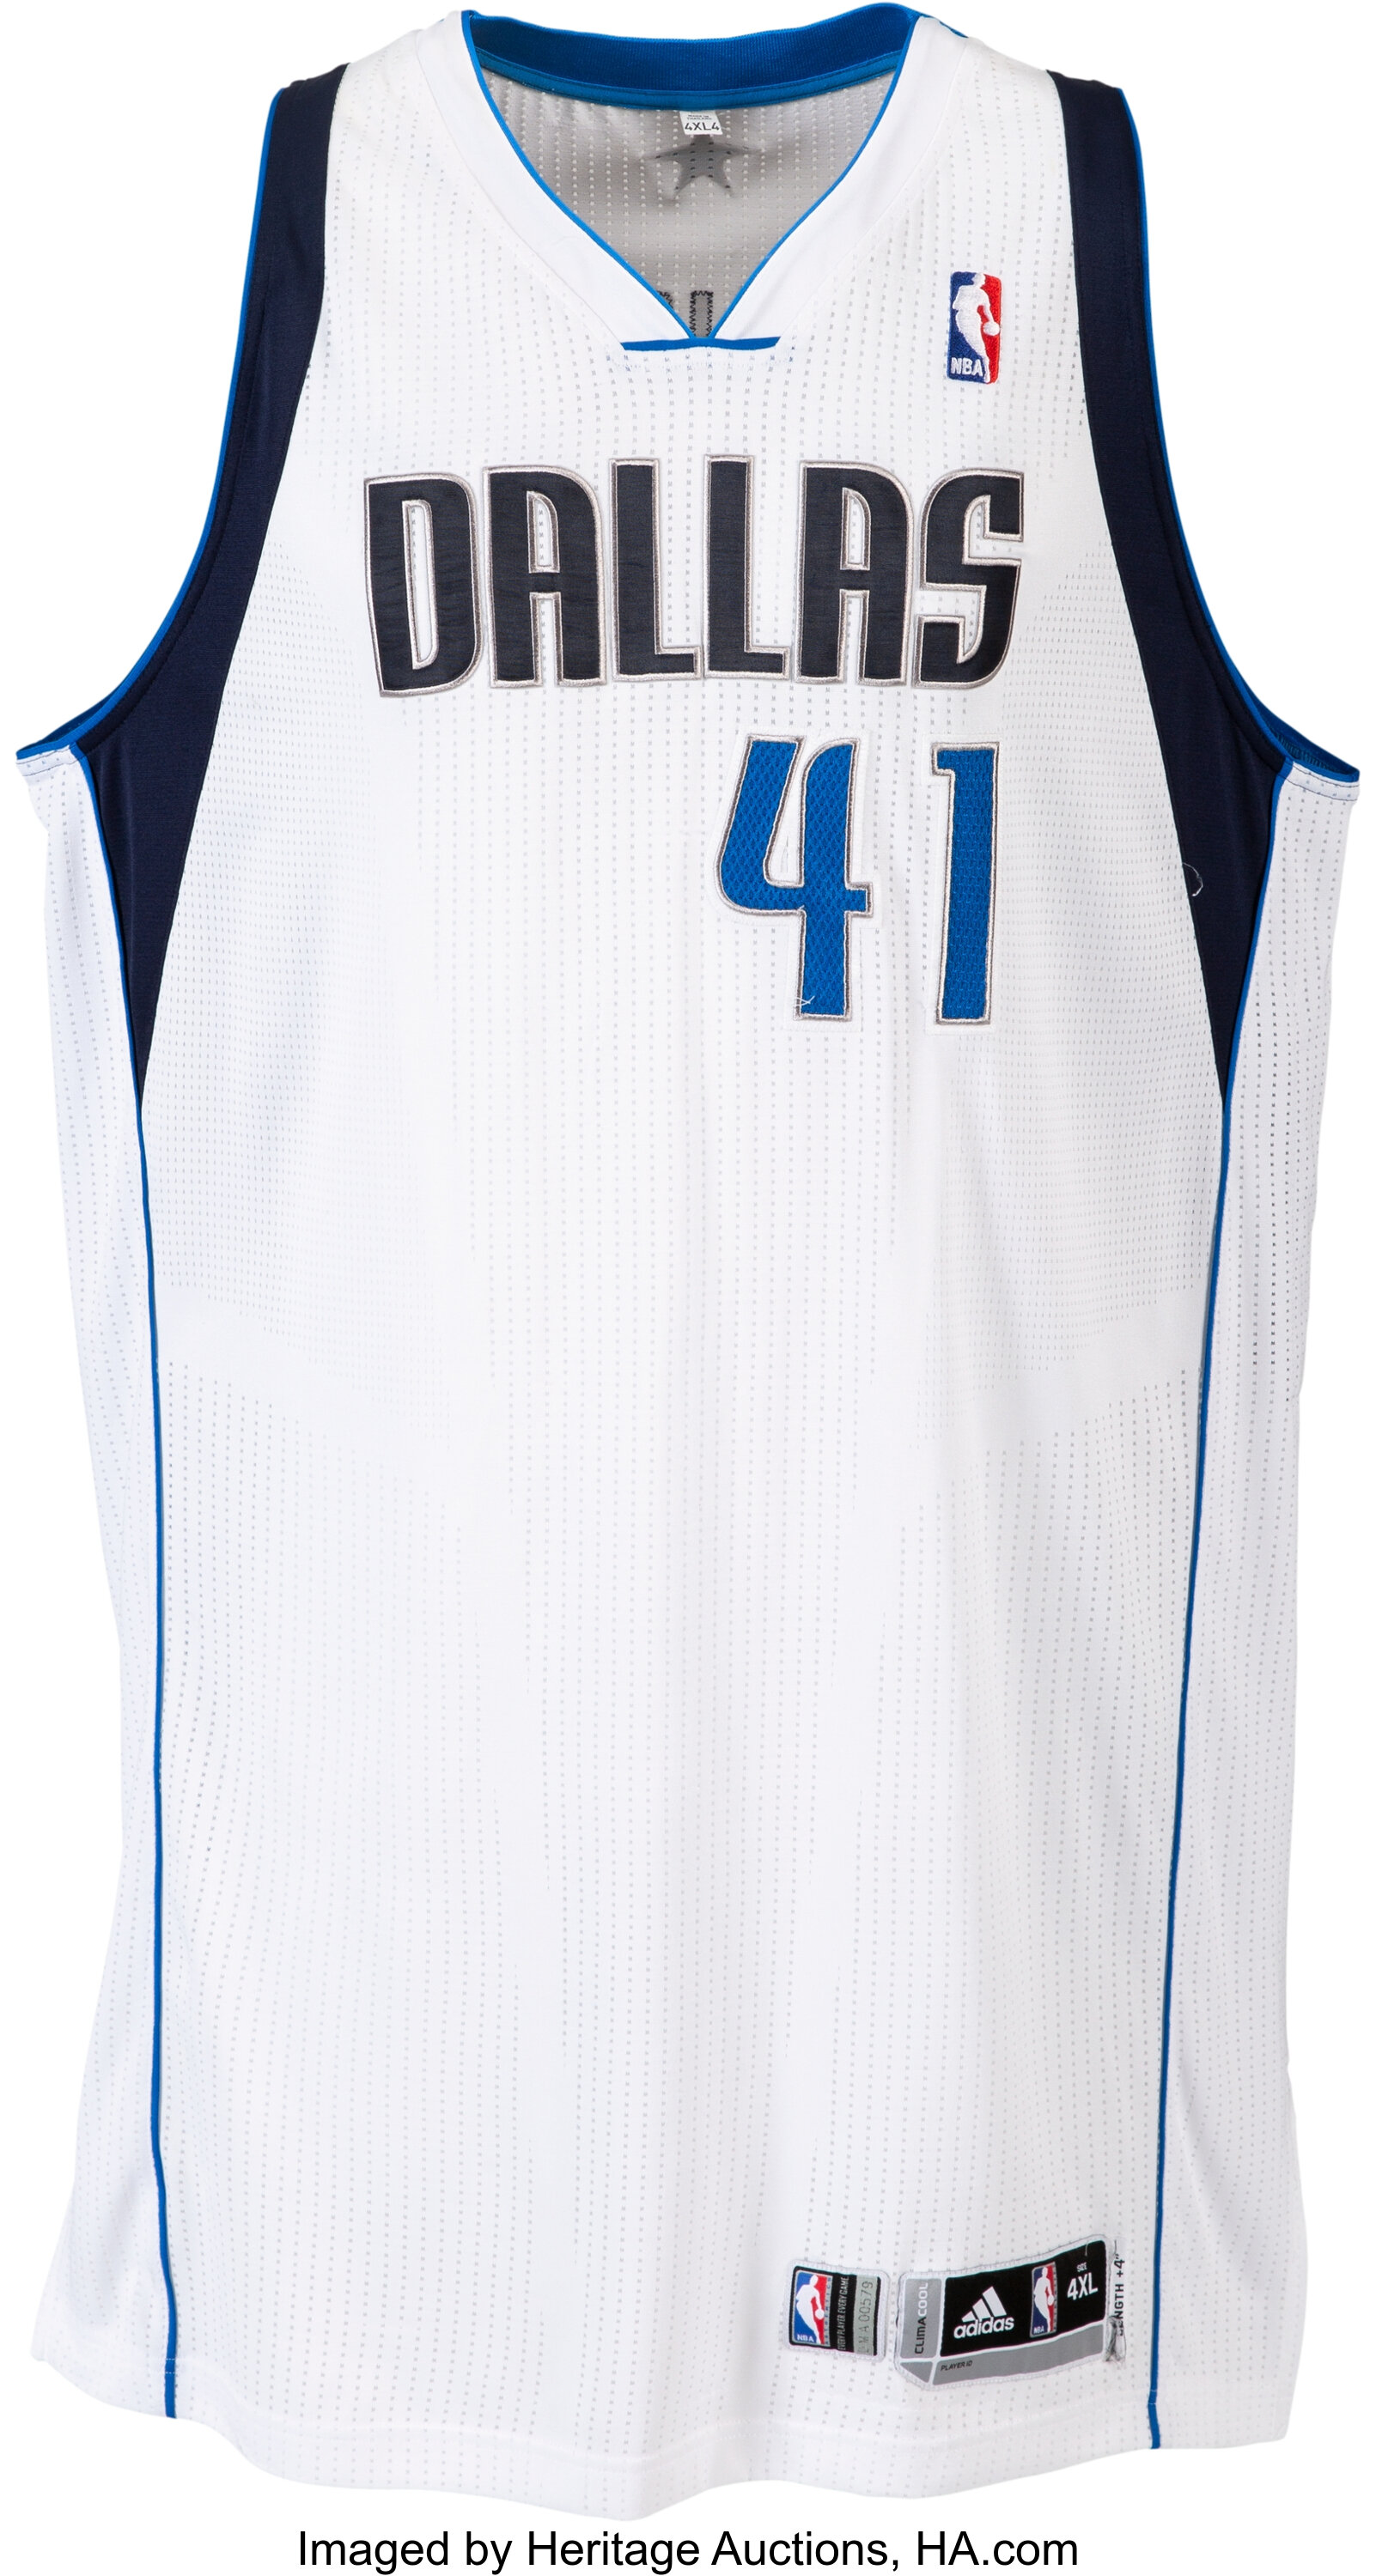 Dirk Nowitzki Dallas Mavericks 2007-08 Game Worn Basketball Jersey  Available For Immediate Sale At Sotheby's